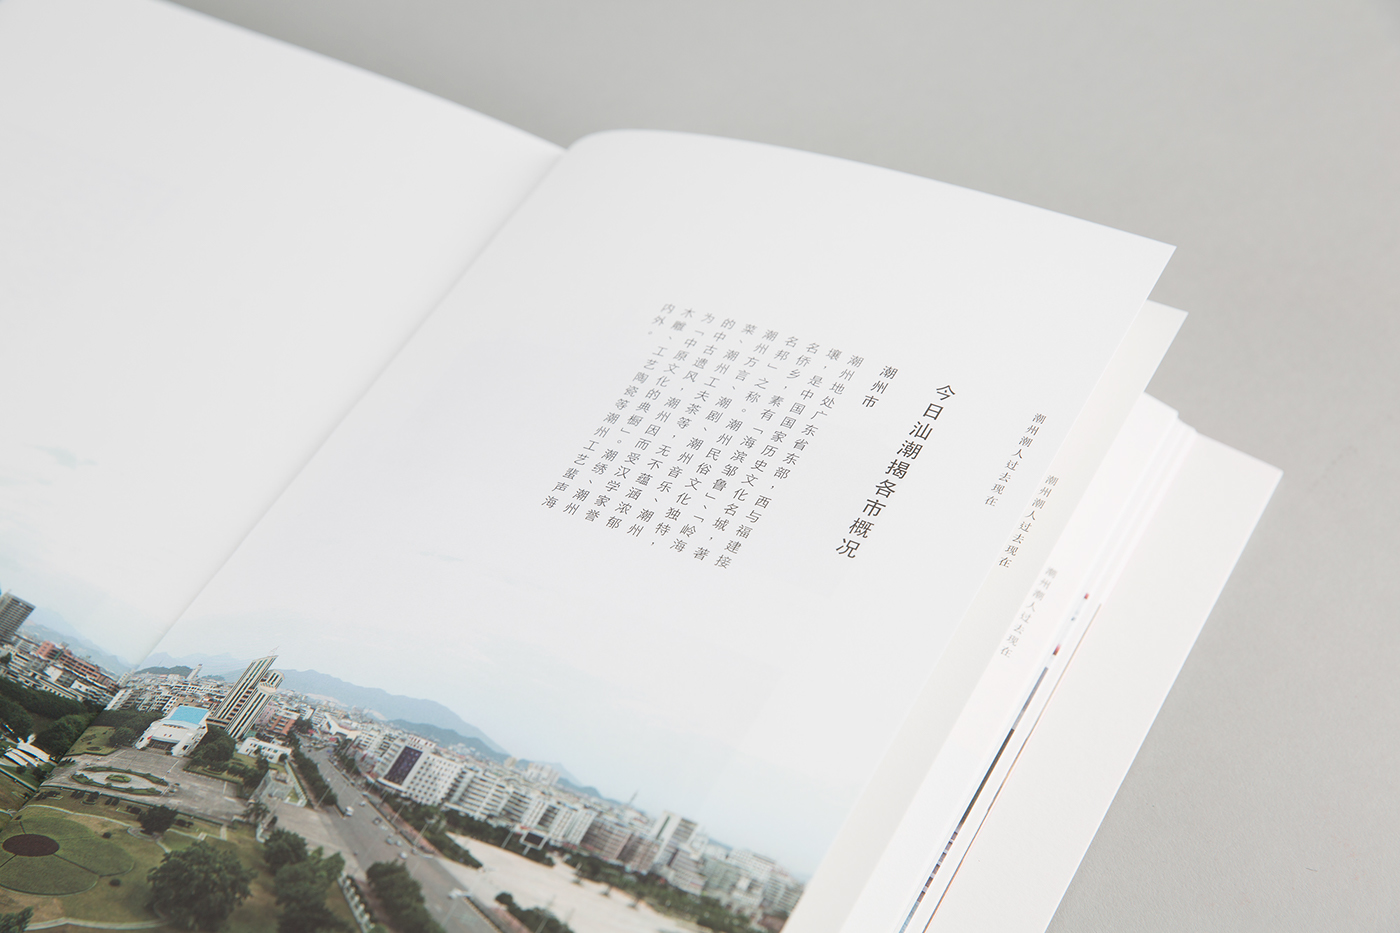 singapore teochew culture teochew festival teochew anniversary anniversary commemorative book Layout Design Layout corporate work corporate Singapore design singapore chinese culture dialect teochew clan mandarin typography Chinese typography